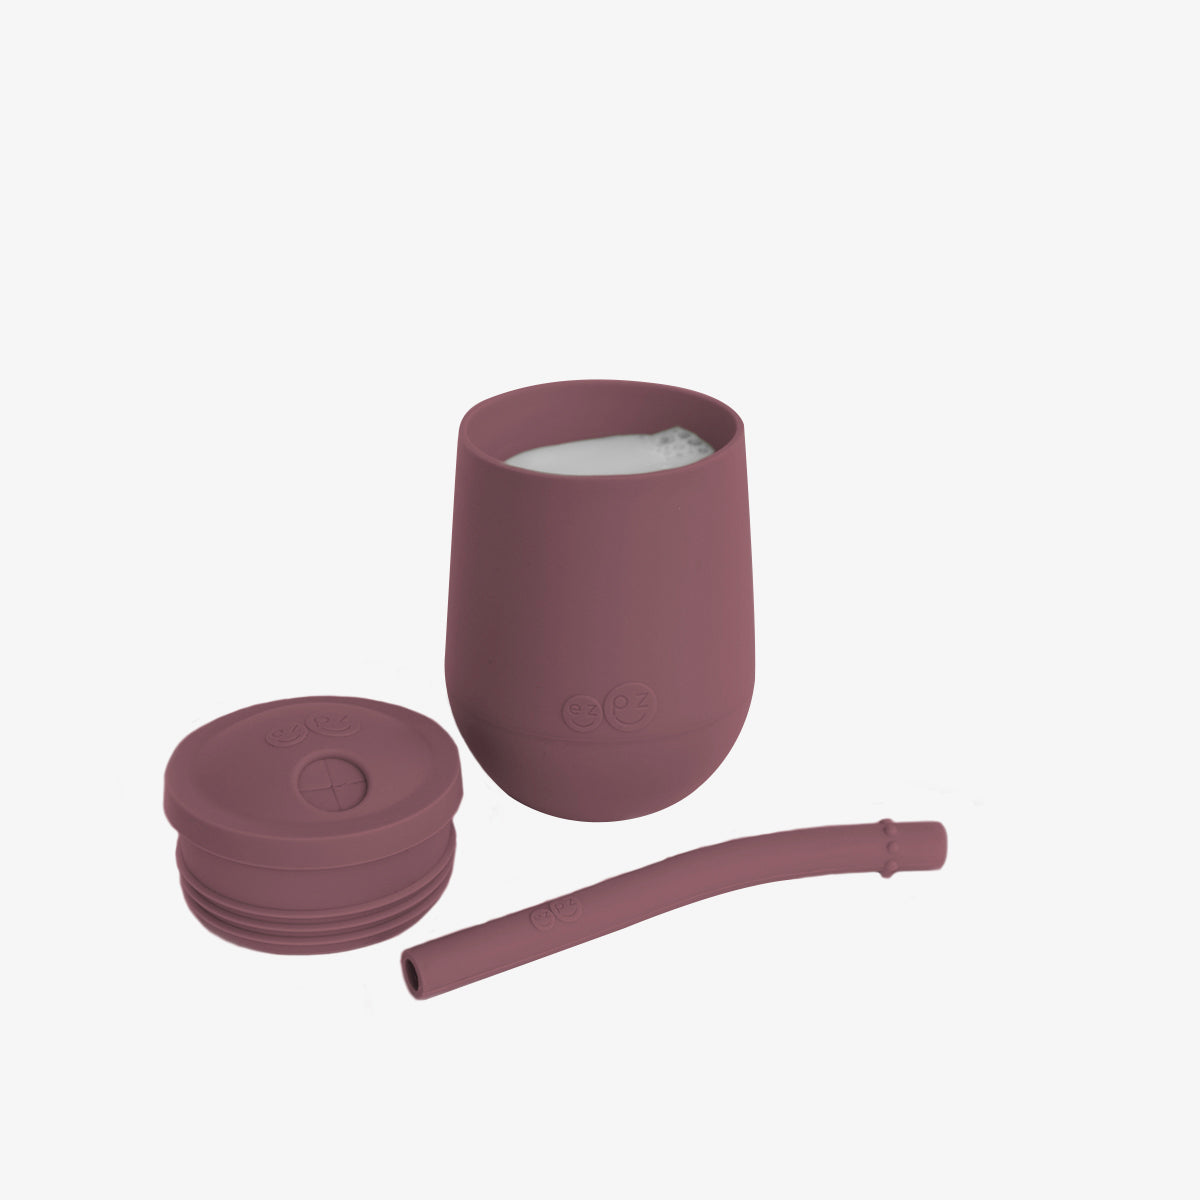 The Mini Cup + Straw in Mauve by ezpz / Silicone Drinking Cup and Straw Training System for Toddlers